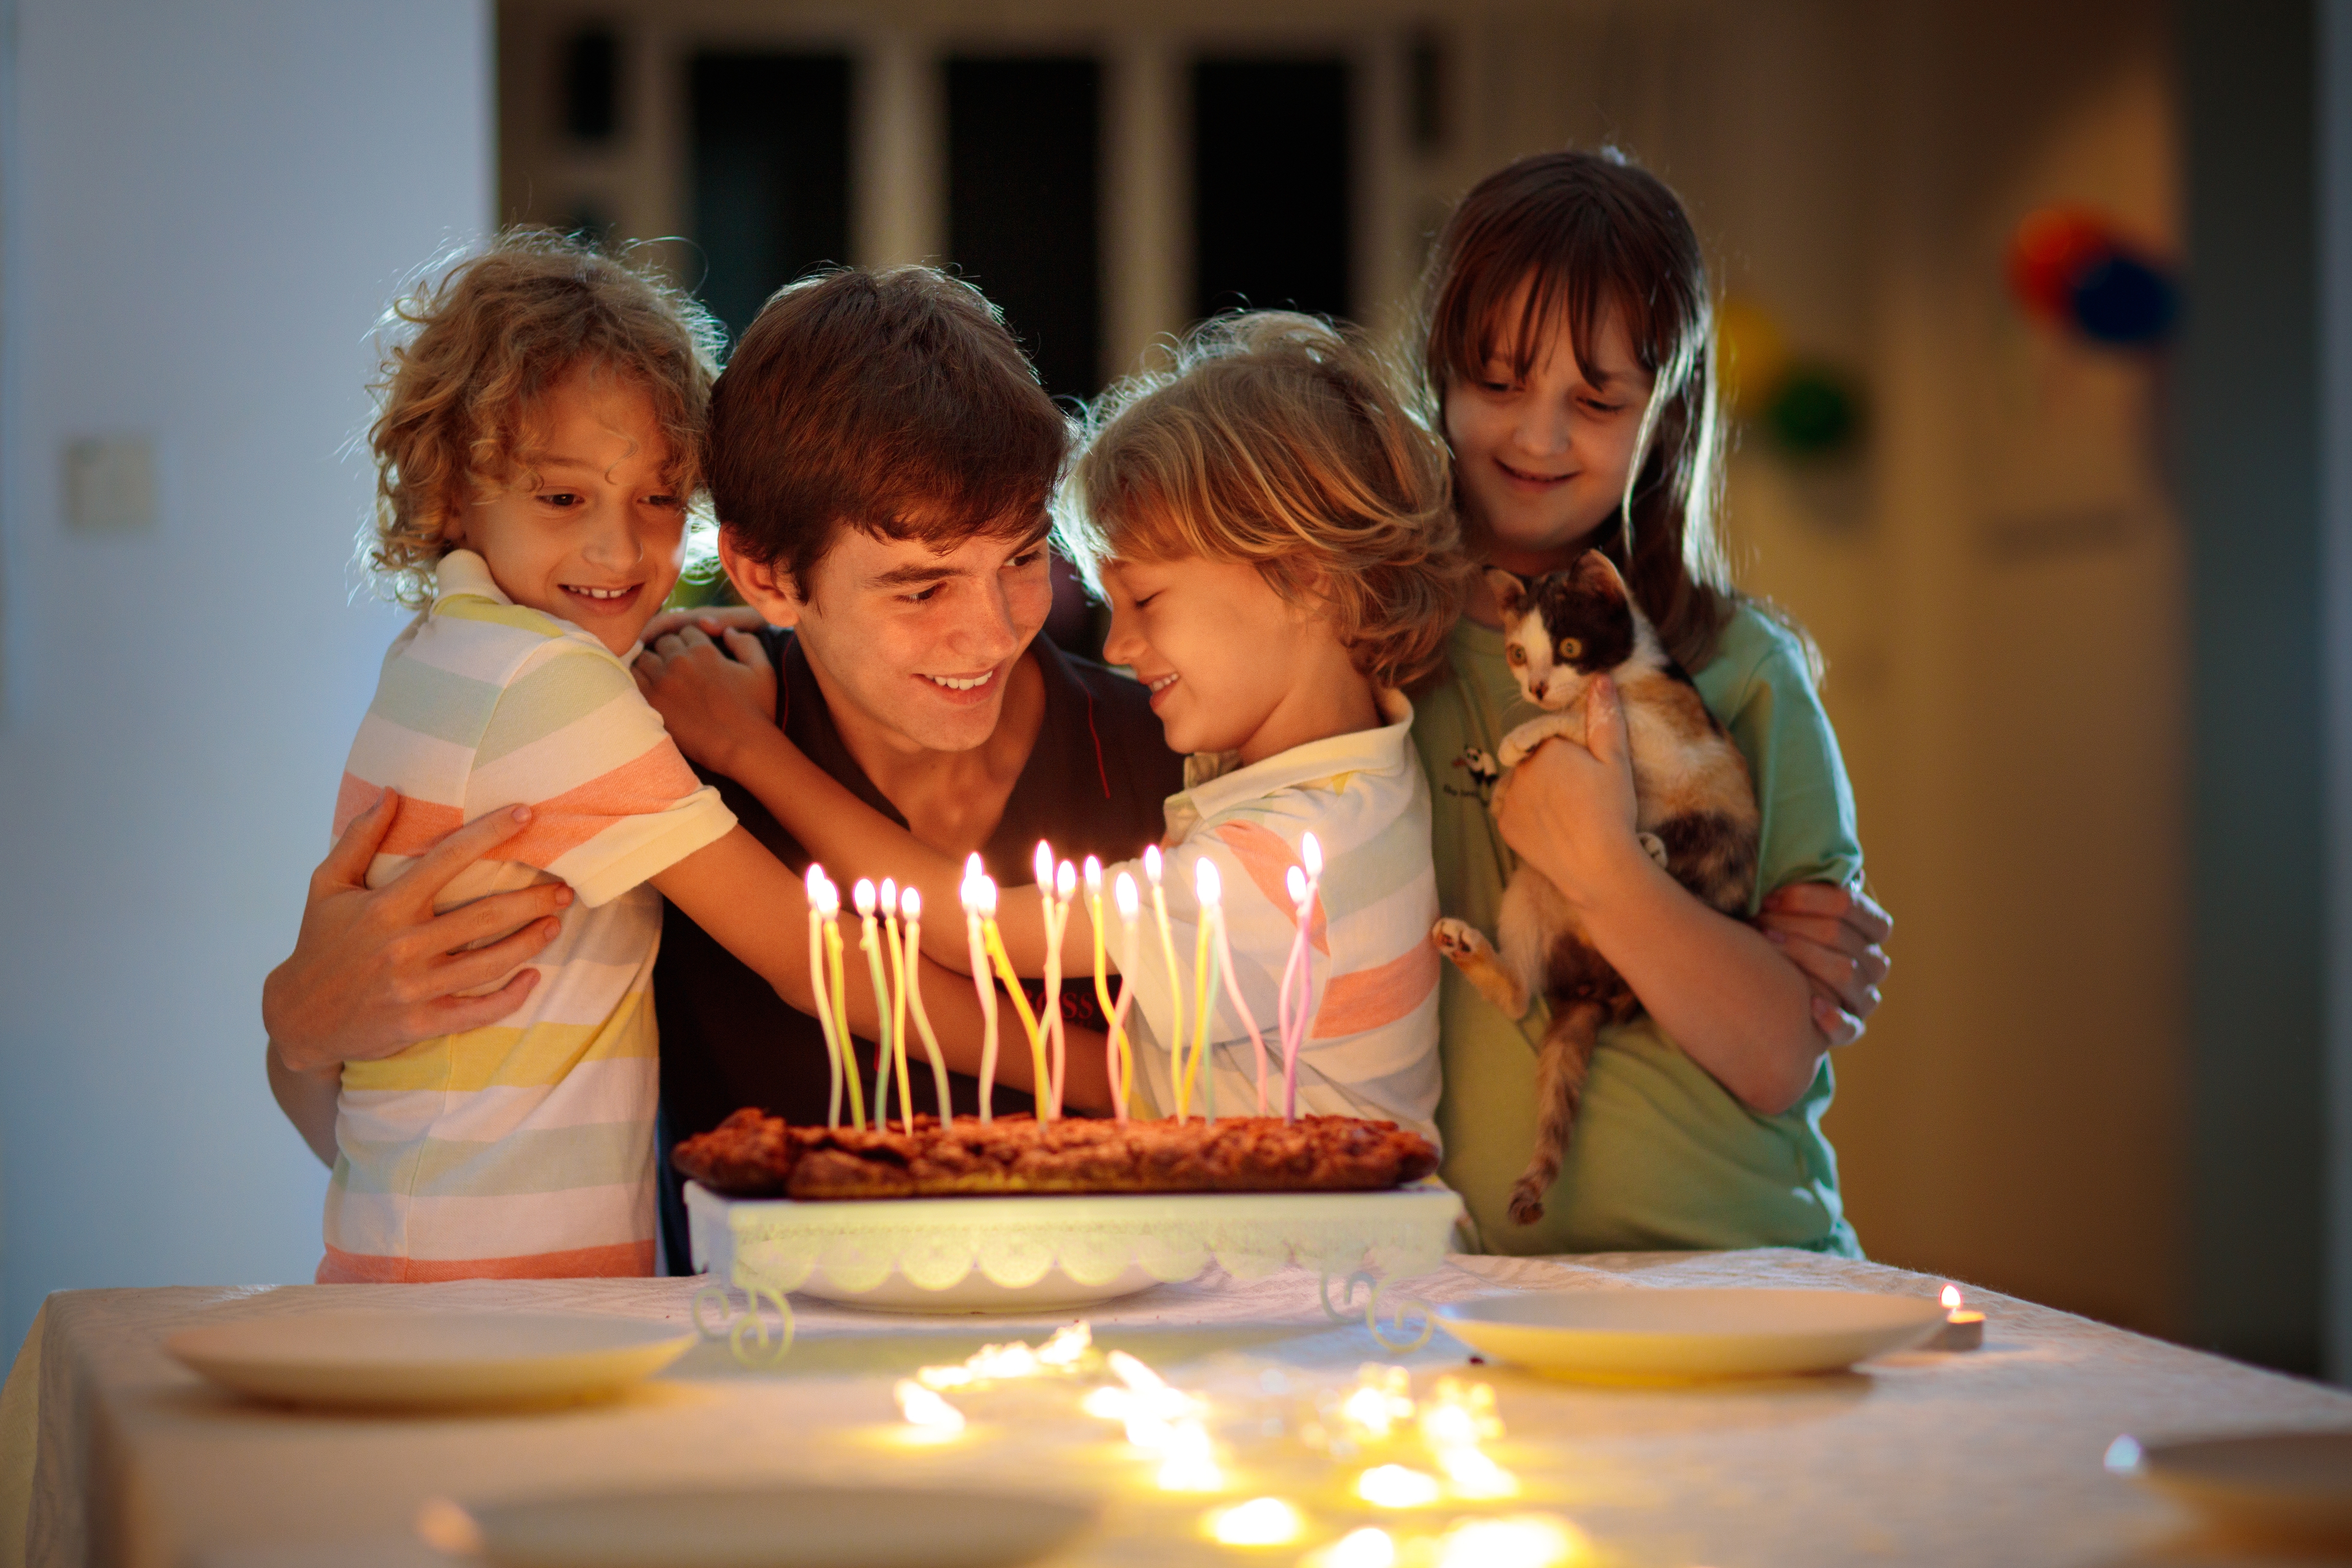 A teenage boy celebrating his birthday with his younger siblings | Source: Shutterstock